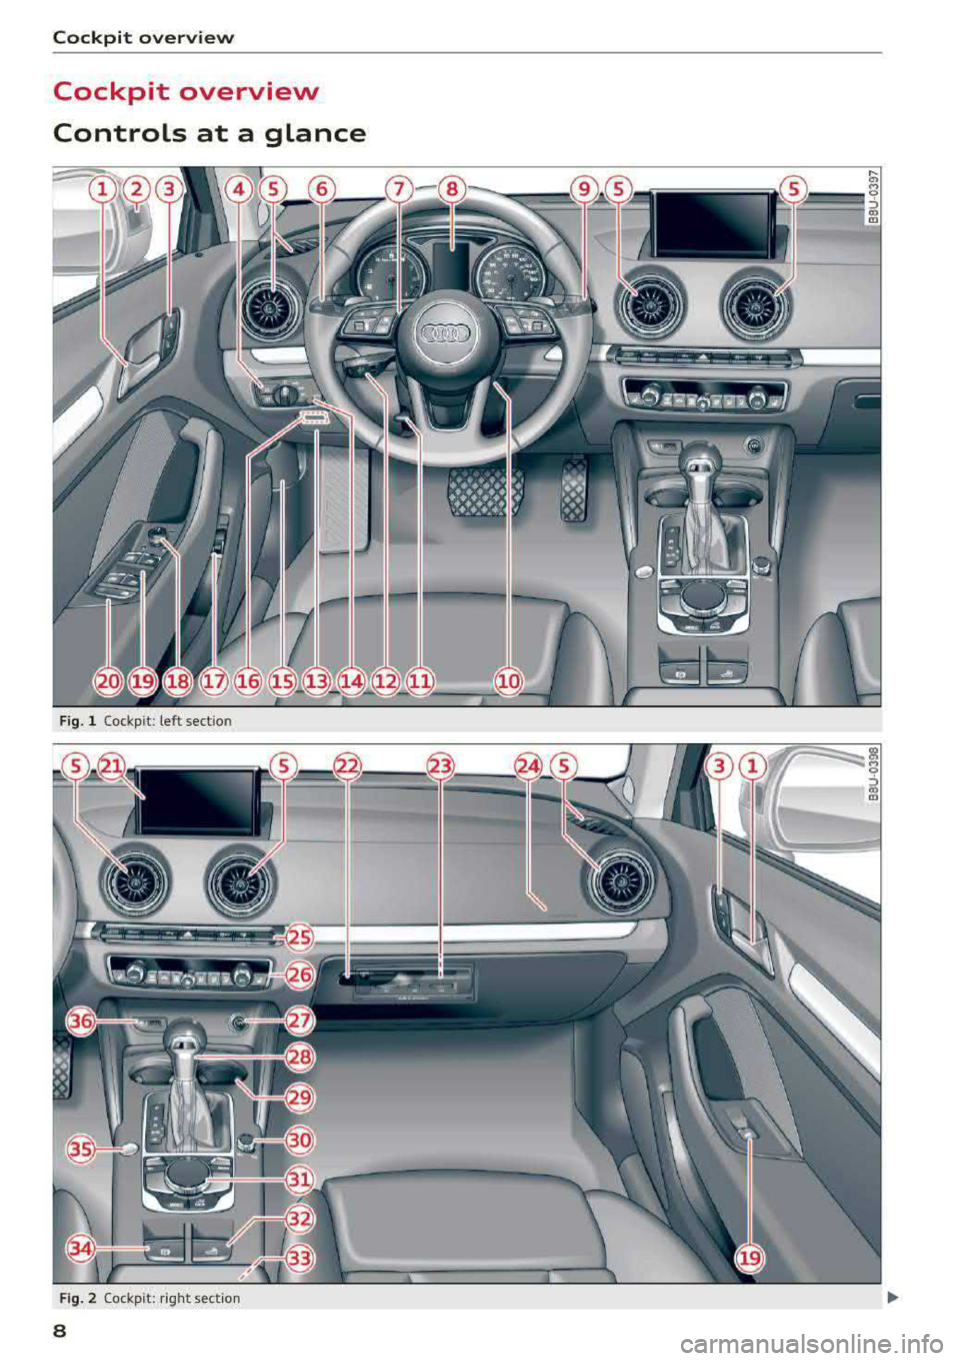 AUDI S3 SEDAN 2017  Owners Manual Cockpit  overview 
Cockpit  overview  
Controls  at  a  glance 
c::: 
F ig.  1  Cockpit : left  section 
F ig.  2  Cockpit:  rig ht sect ion 
8 
:;; M 9 ::i CX) a,  